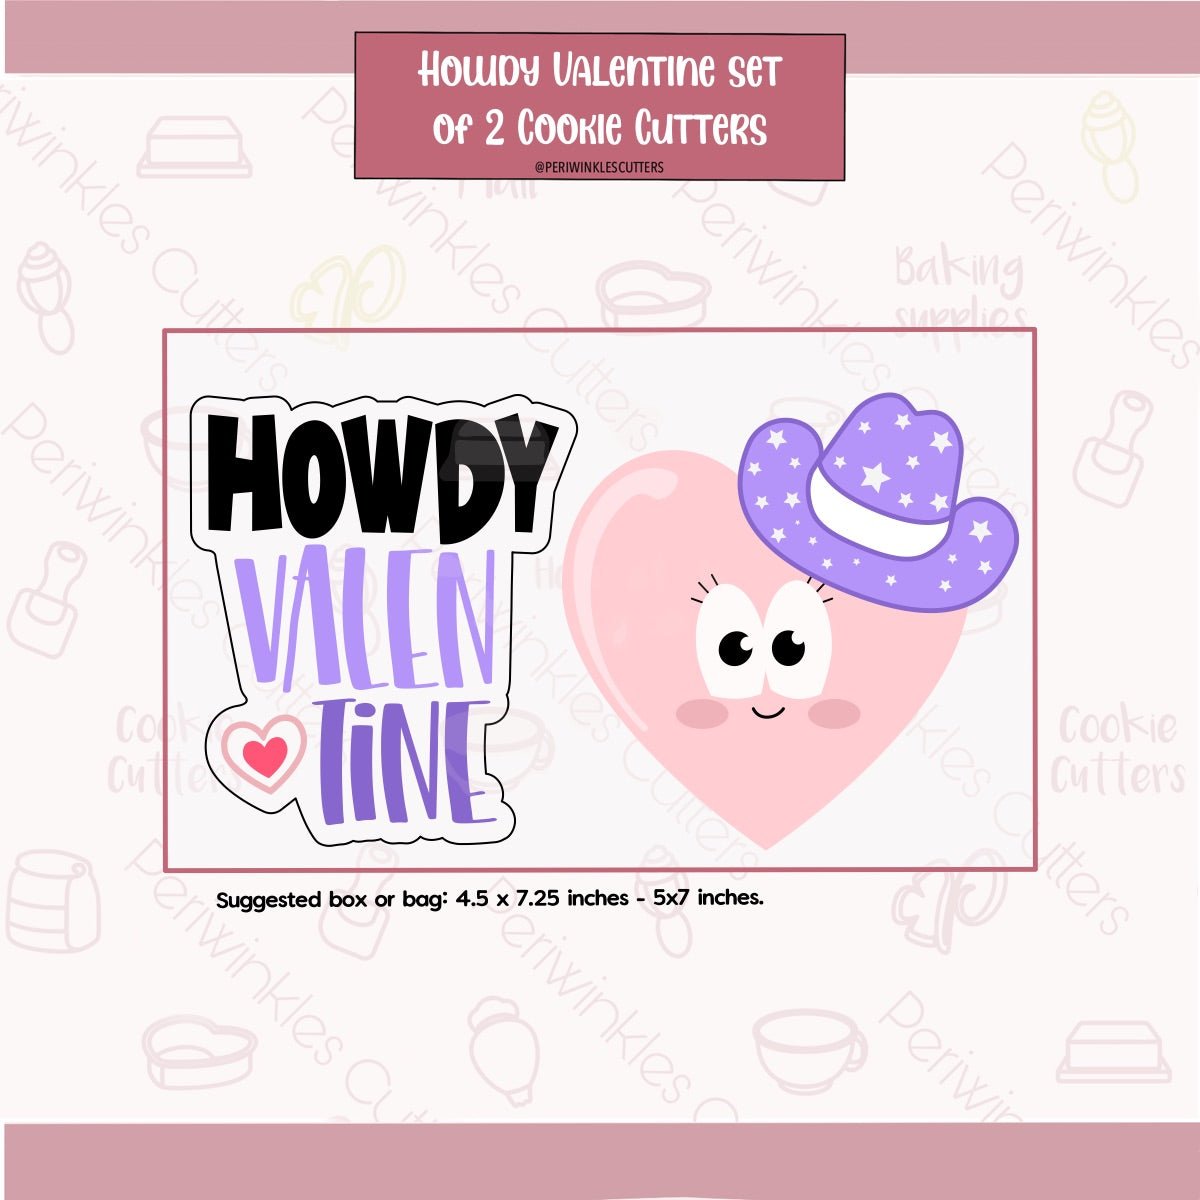 Howdy Valentine Set of 2 Cookie Cutter - Periwinkles Cutters Cookie Cutter